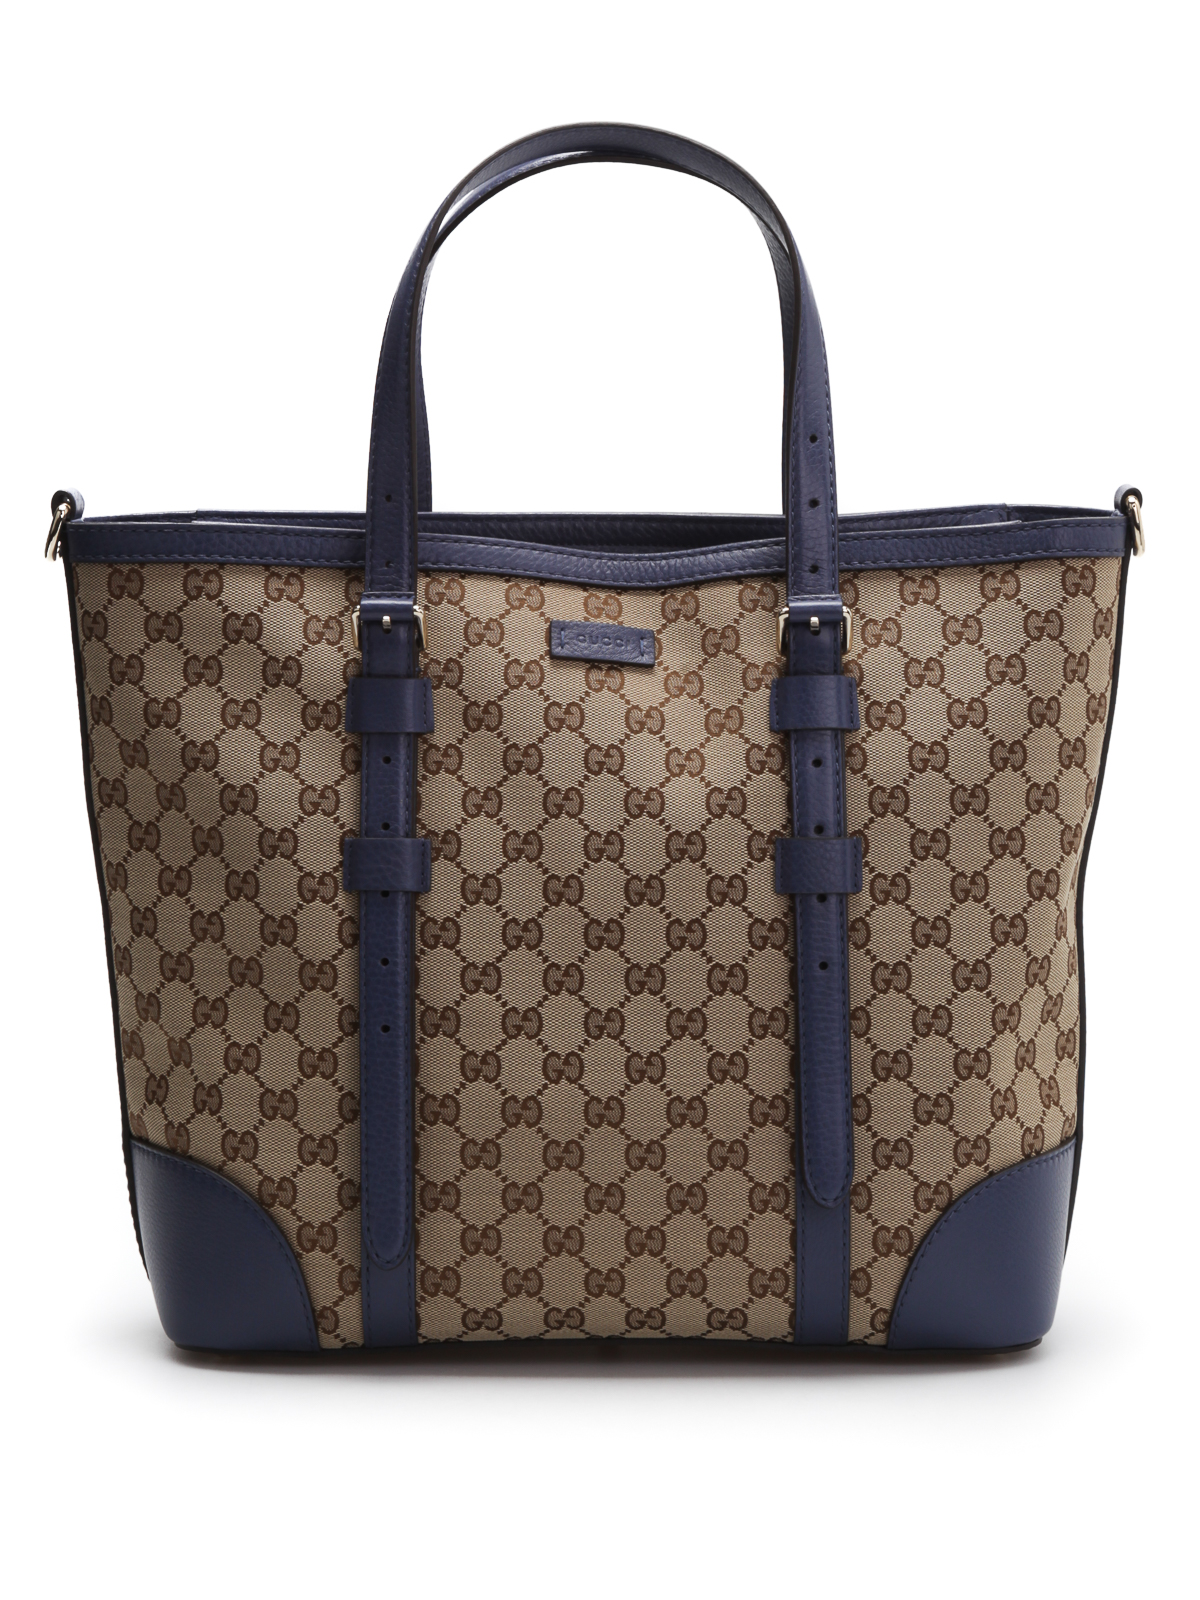 GG Classic tote by Gucci - totes bags | iKRIX